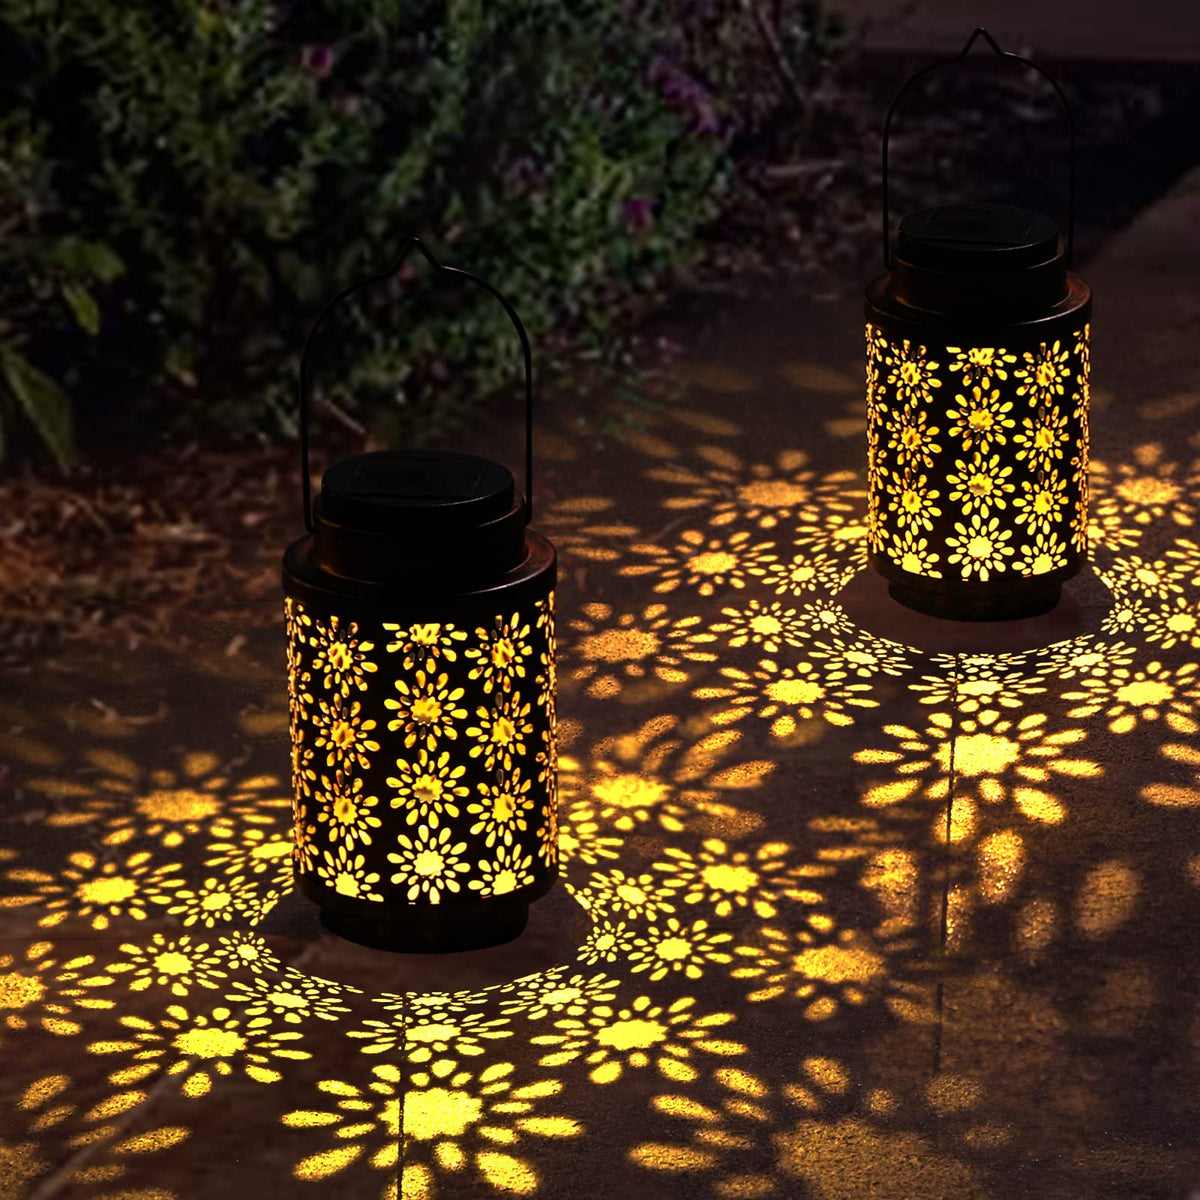  Solar Lantern Outdoor Hanging Solar Lights Dancing Flame  Vintage Led Waterproof Camping Lamps, Landscape Decor for Table Patio Garden  Yard Pathway Porch 2Pack (Orange Flame) : Tools & Home Improvement